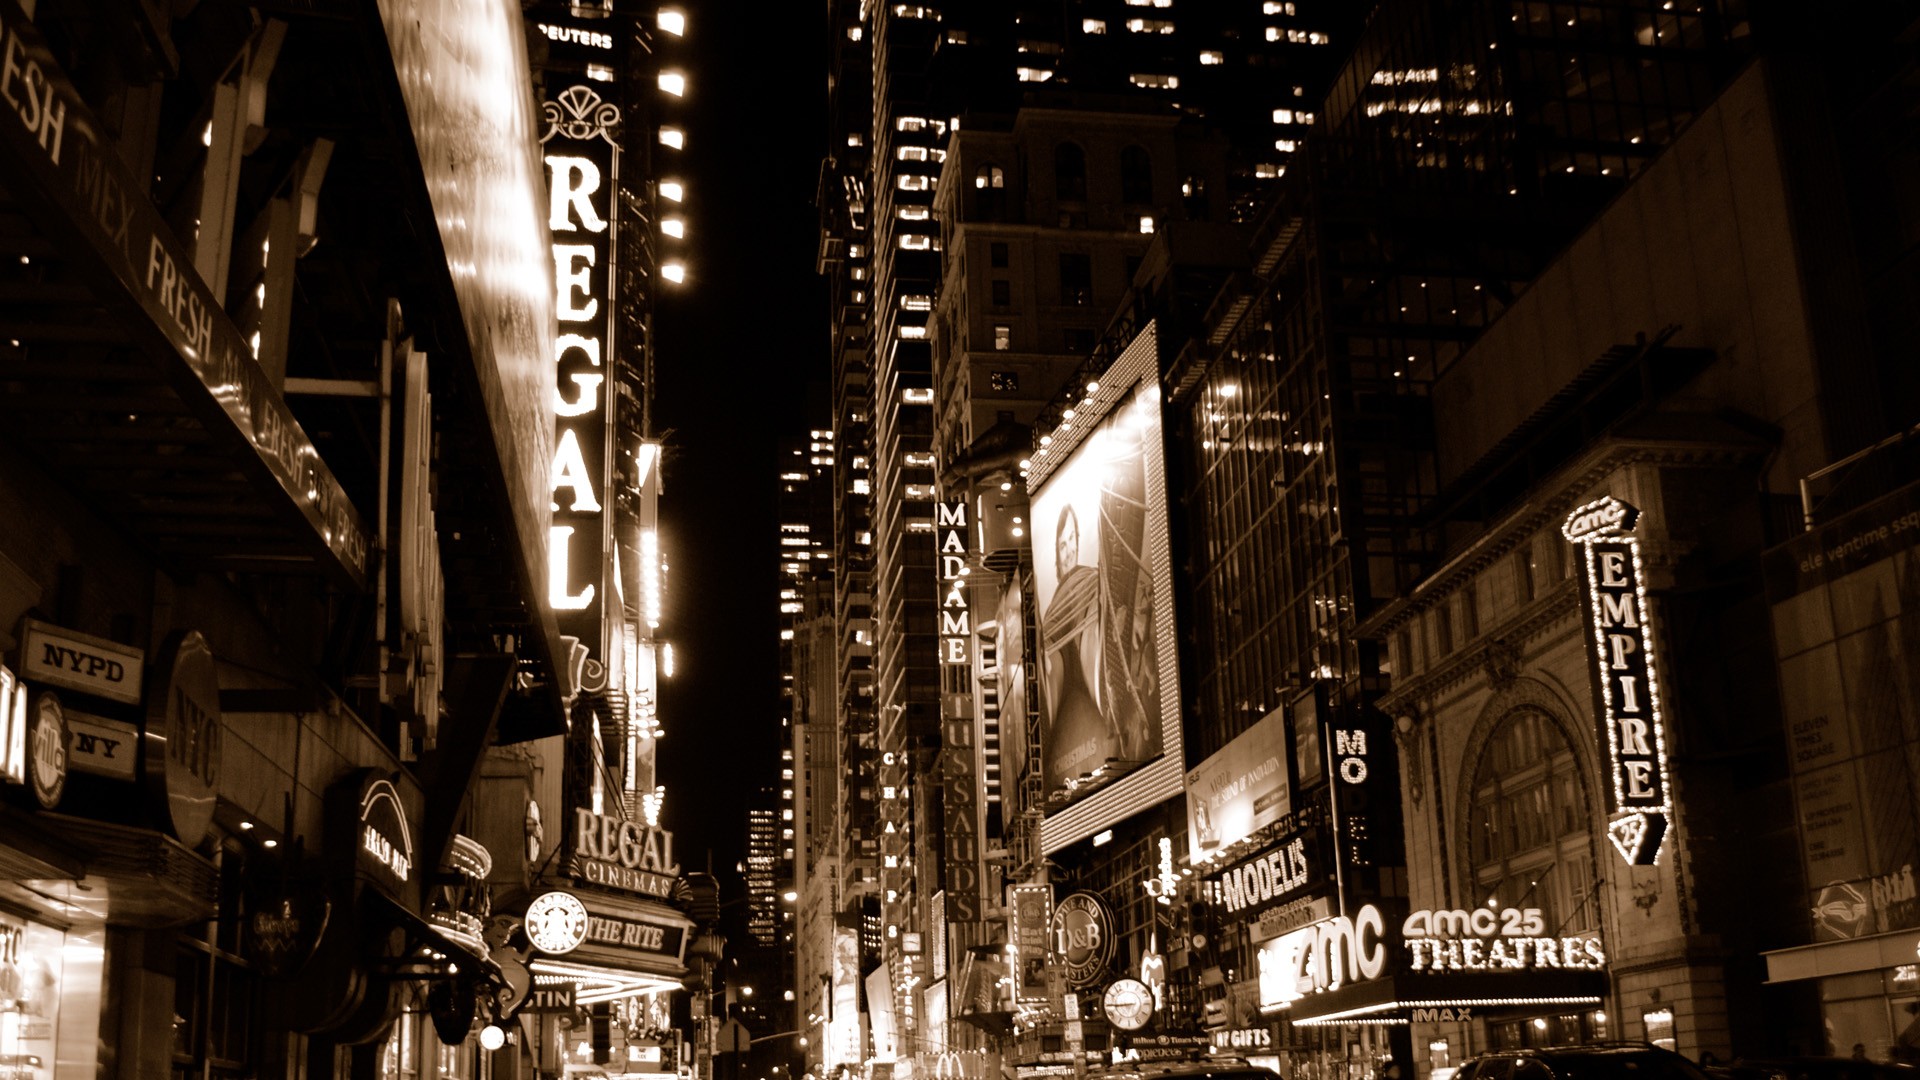 cityscape, USA, Architecture, New York City, Street, Building, Skyscraper, Night, Street Light, Signs, Theater, Movie Poster, Theaters, Sepia Wallpaper